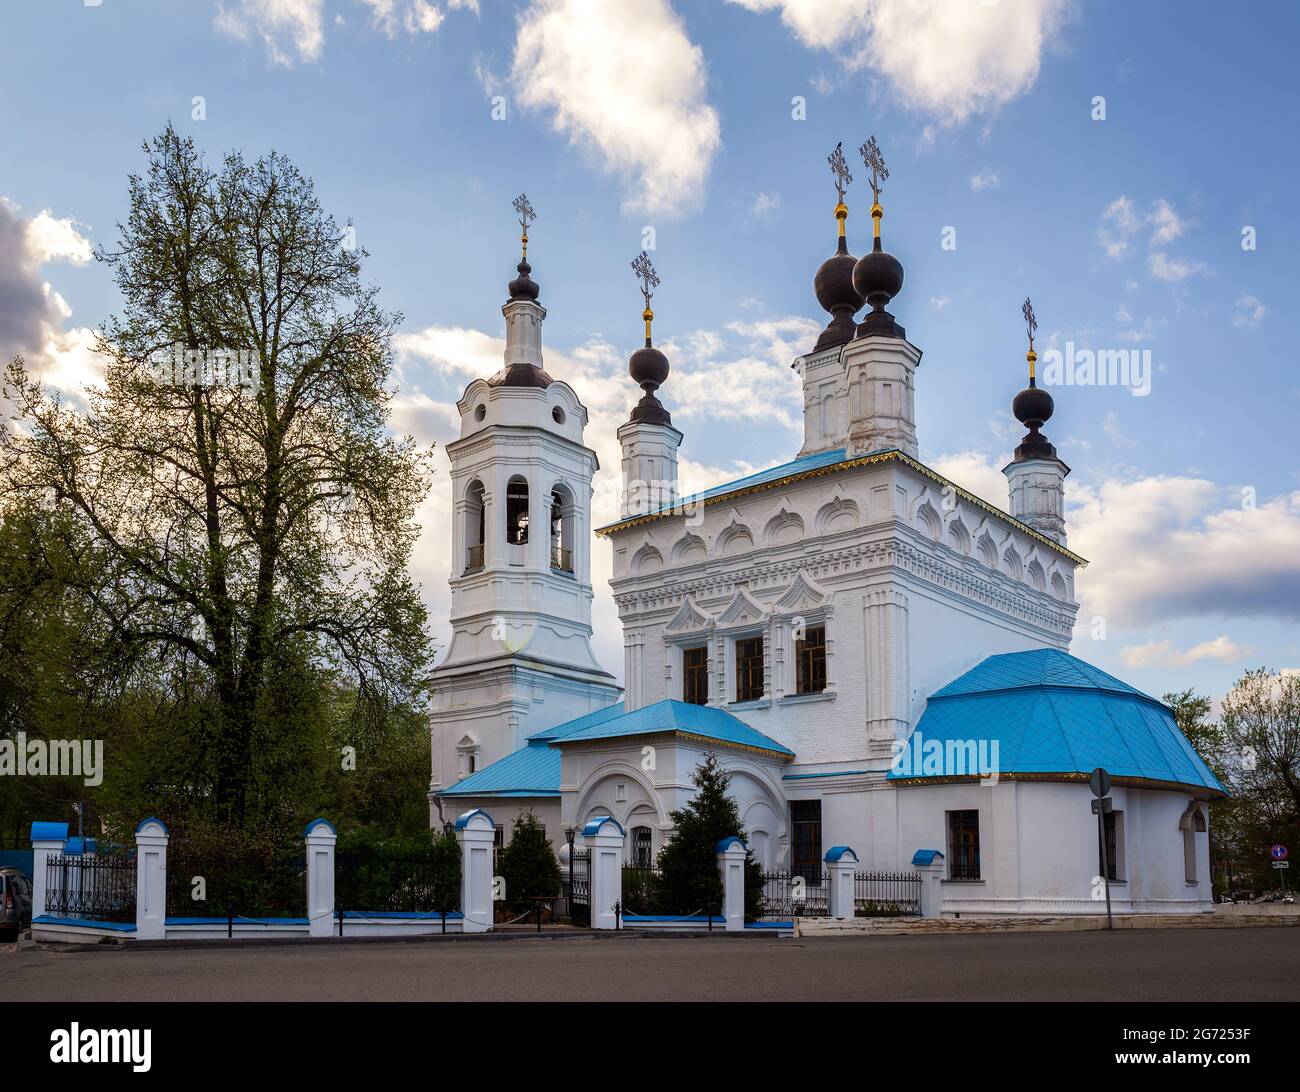 Beautiful old church of the Intercession of the Blessed Virgin Mary in Kaluga, Russia Stock Photo